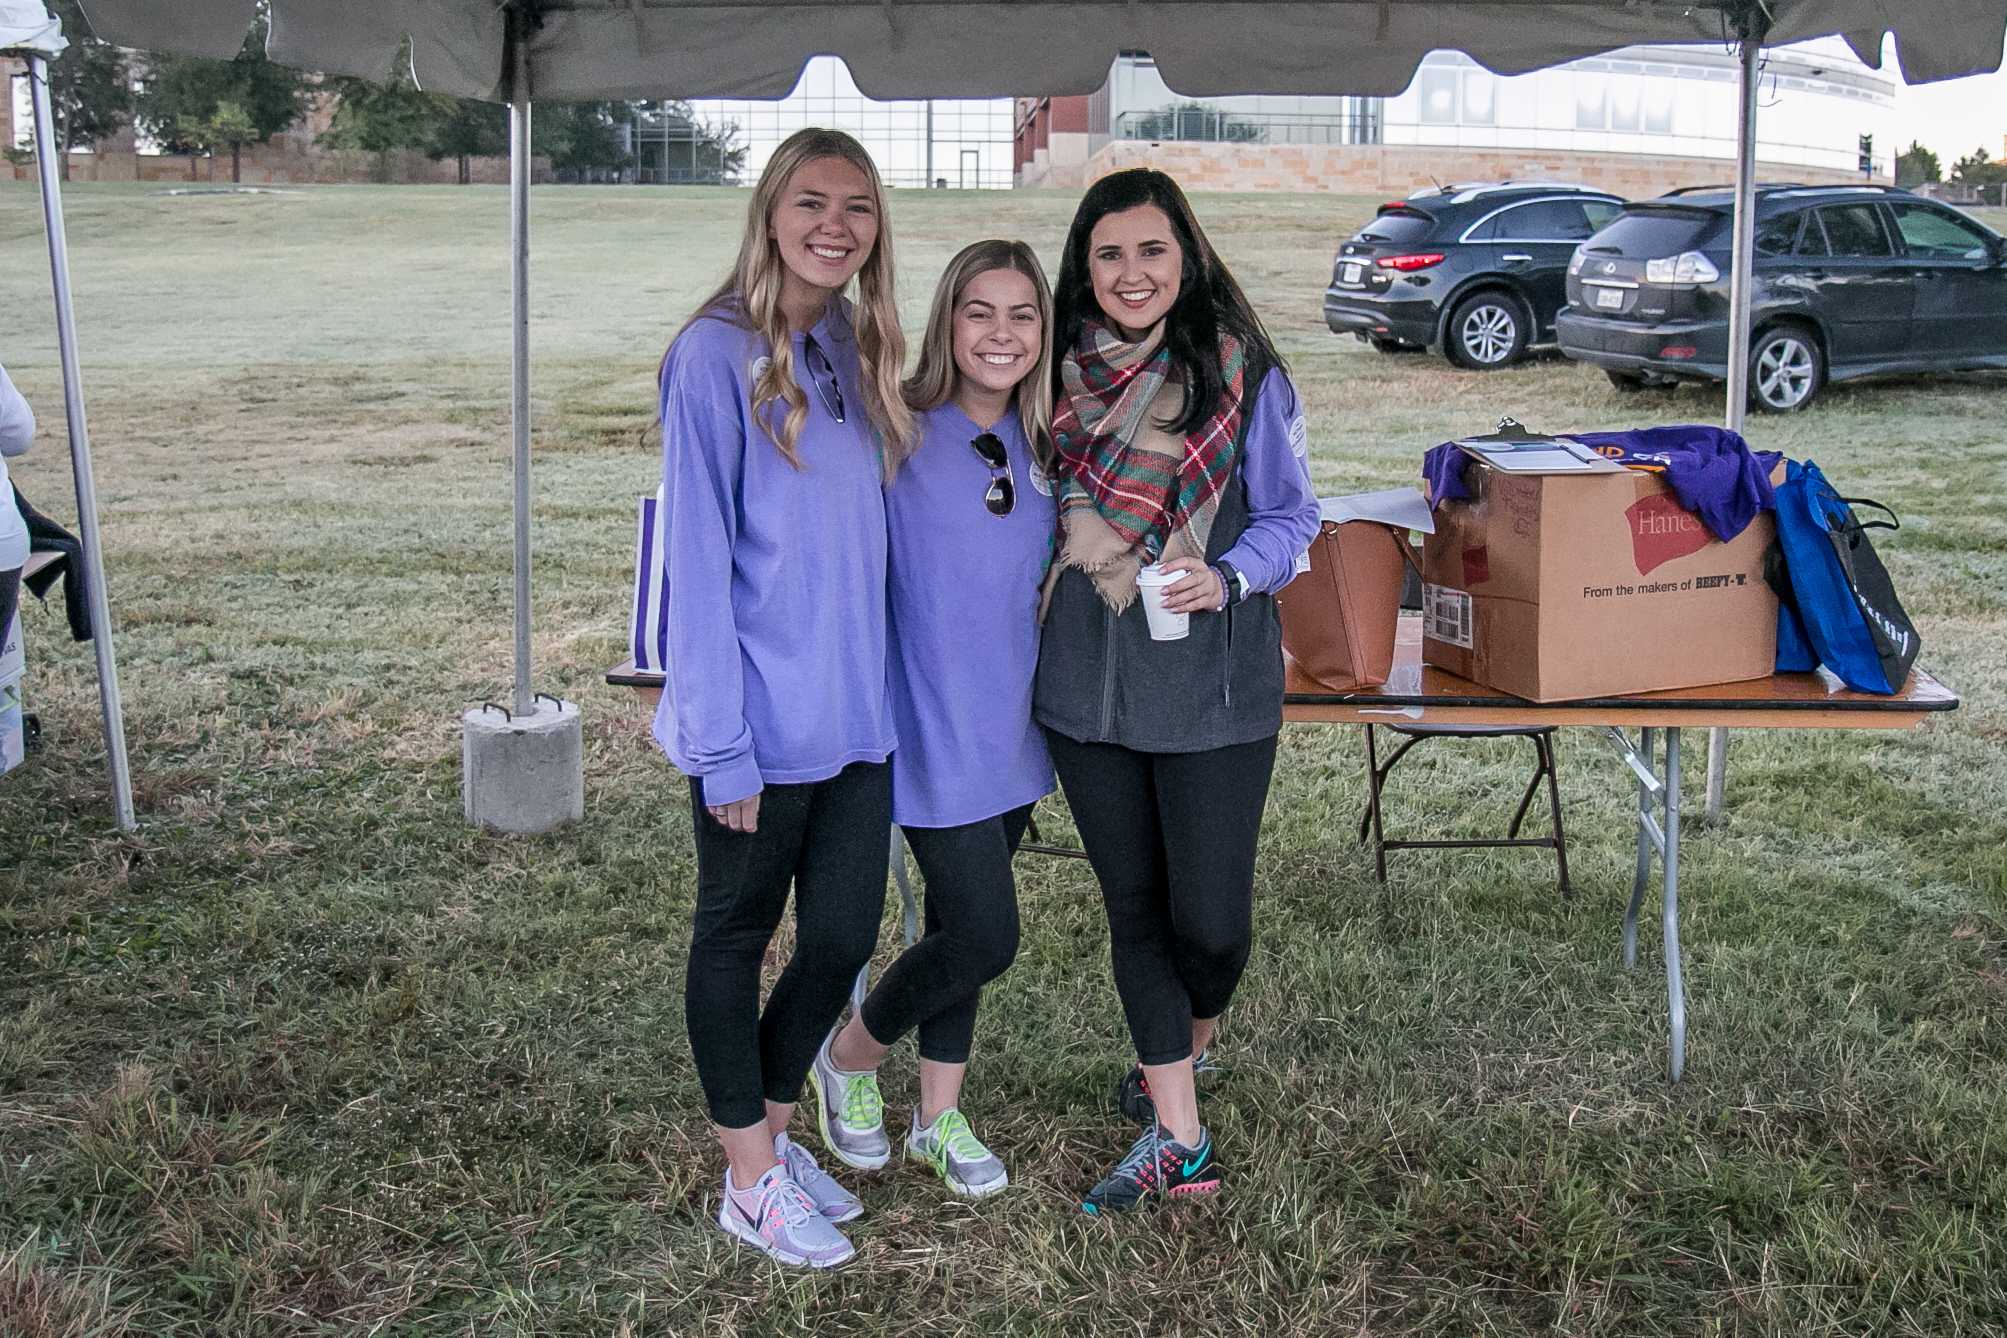 Sigma Kappa seniors Christa Martin, Christina DeMarois and sophomore Charlee Bisch stand under the Sigma Kappa tent getting ready to ask walk participants to sign advocacy cards (Photo courtesy: Alzheimer's Association North Central Texas Chapter).